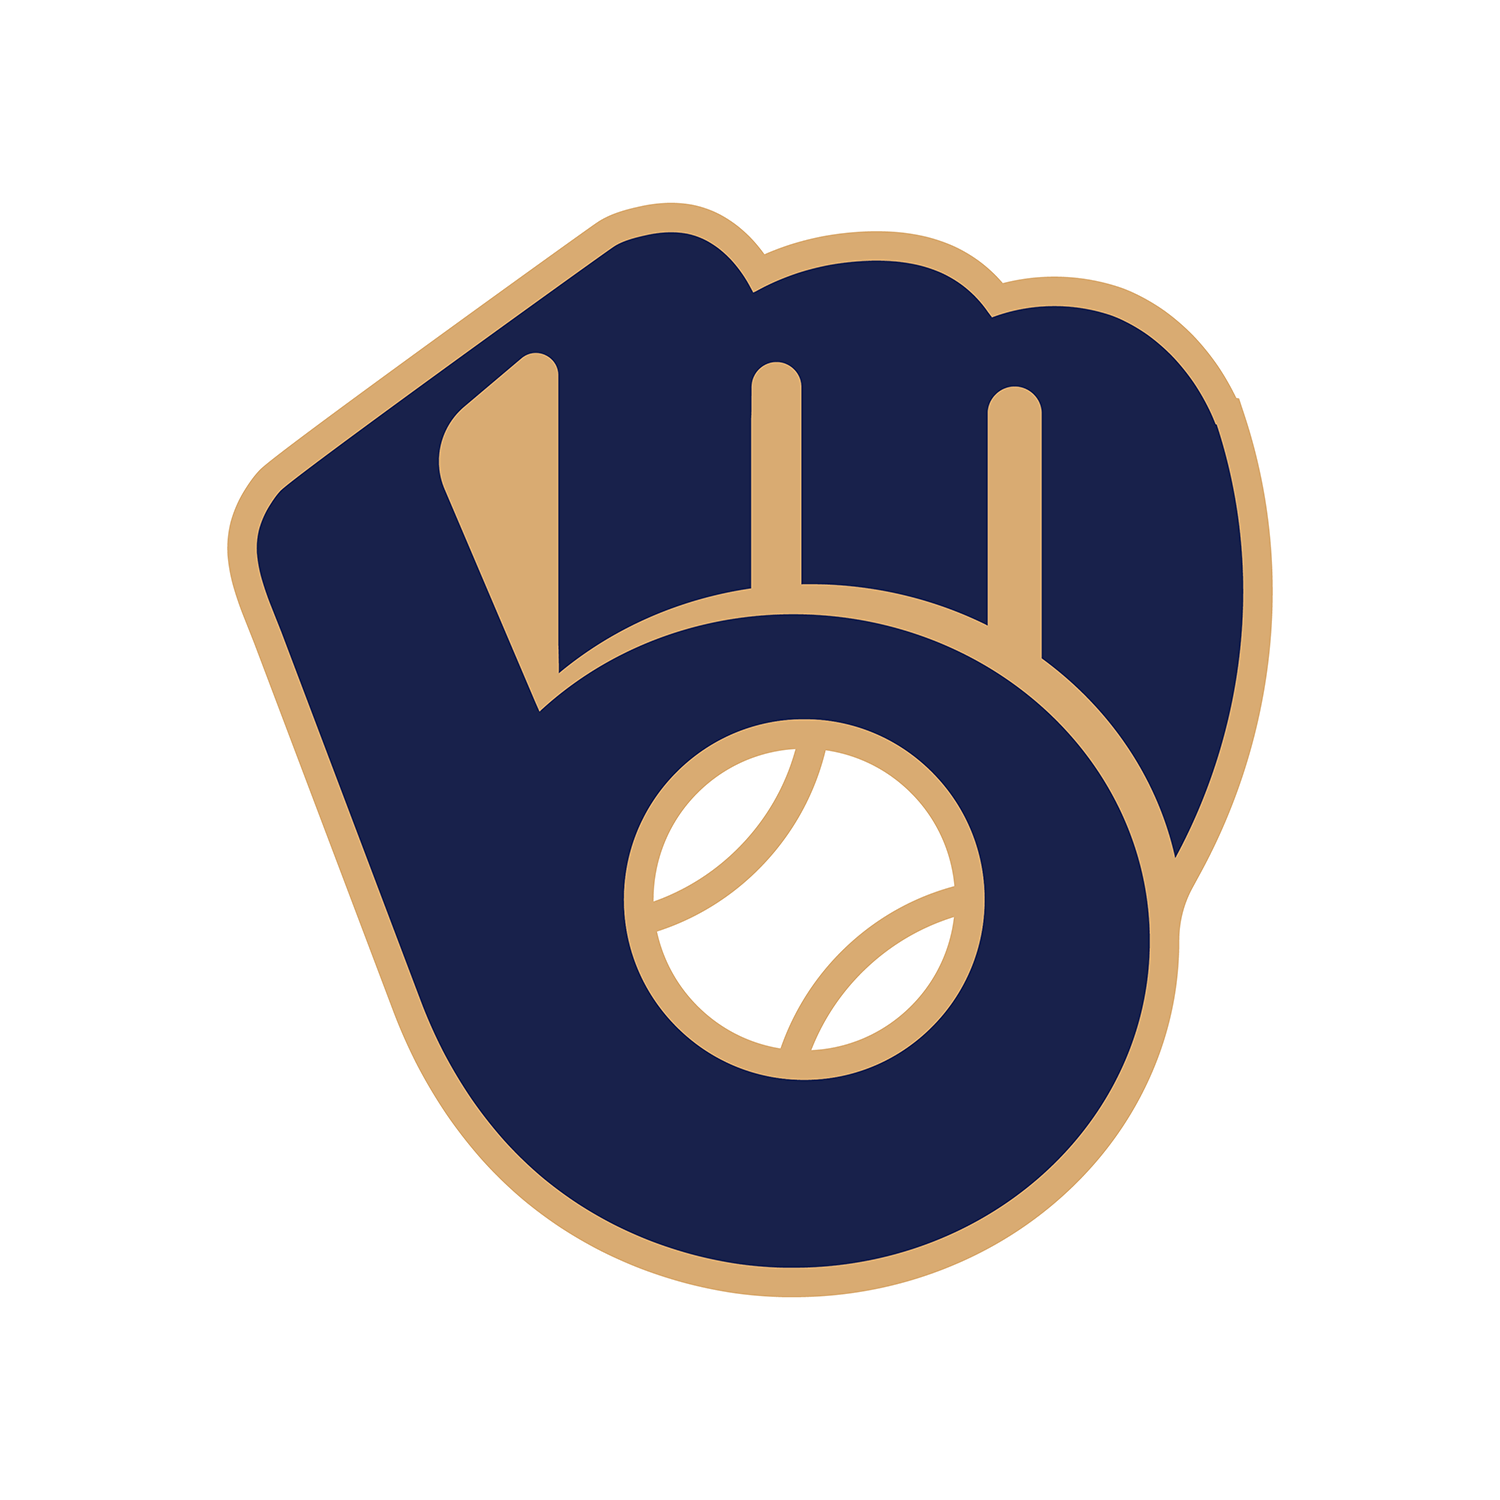 Old M Logo - How old were you when you realized the old Milwaukee Brewers logo